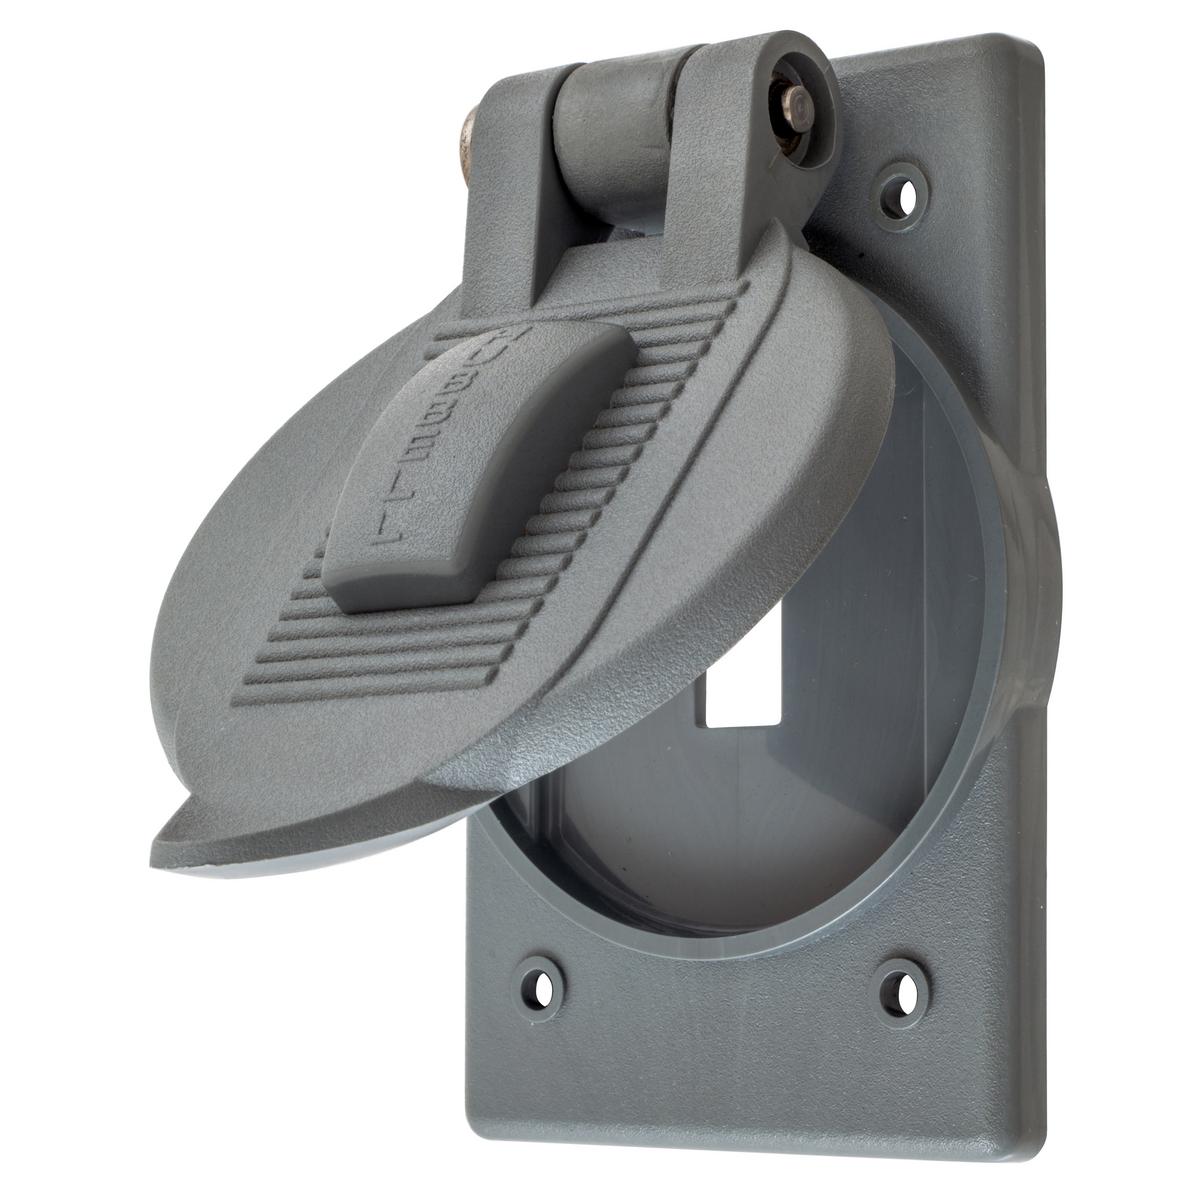 Hubbell HBL5201 Wall Plates and Covers, Weatherproof Cover, 1-Gang, 1) Toggle, PBT, Gray  ; Weatherproof for outdoor use ; Rated for use in damp and wet locations with cover closed ; Vertical 4 screw box mount ; Marine Drip Proof